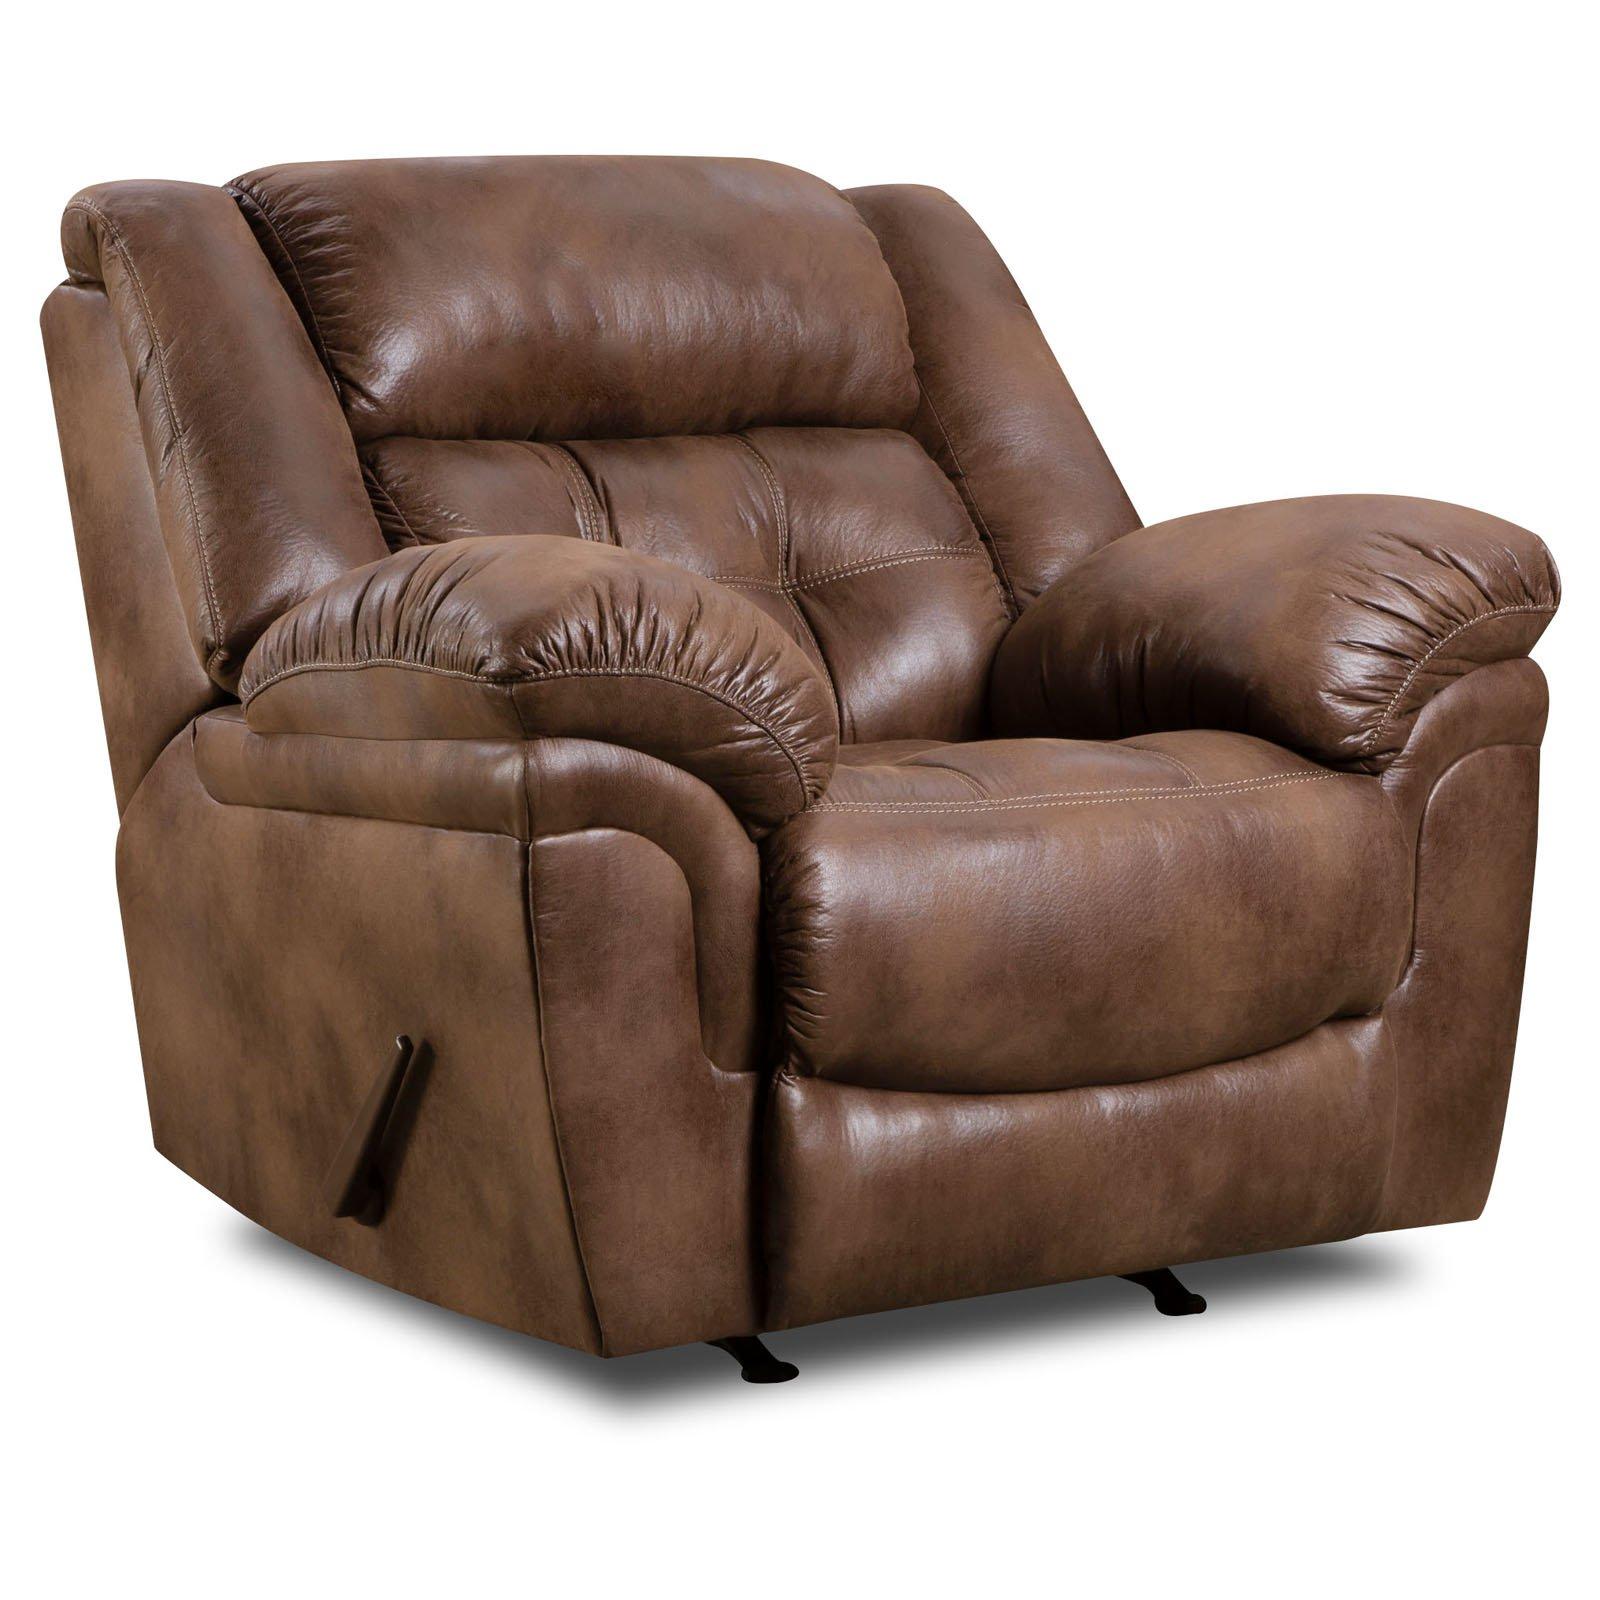 simmons recliners reviews